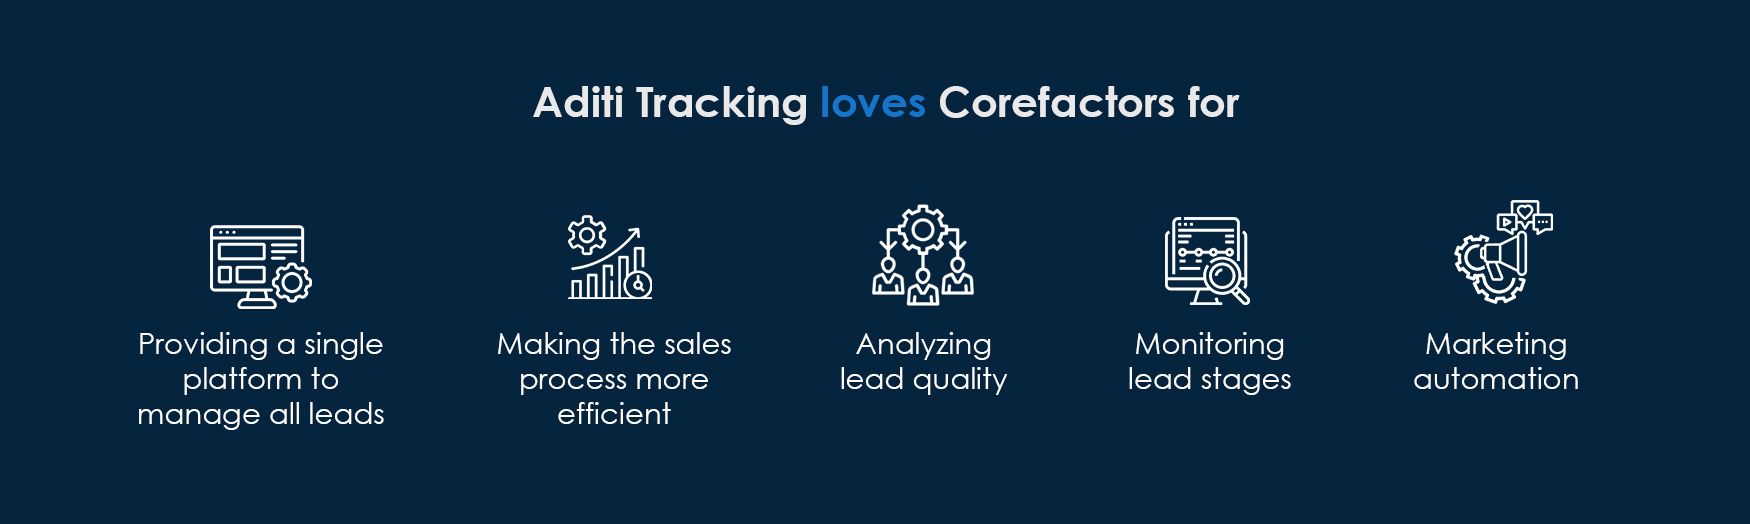 Aditi Tracking loves Corefactors for these factors. 